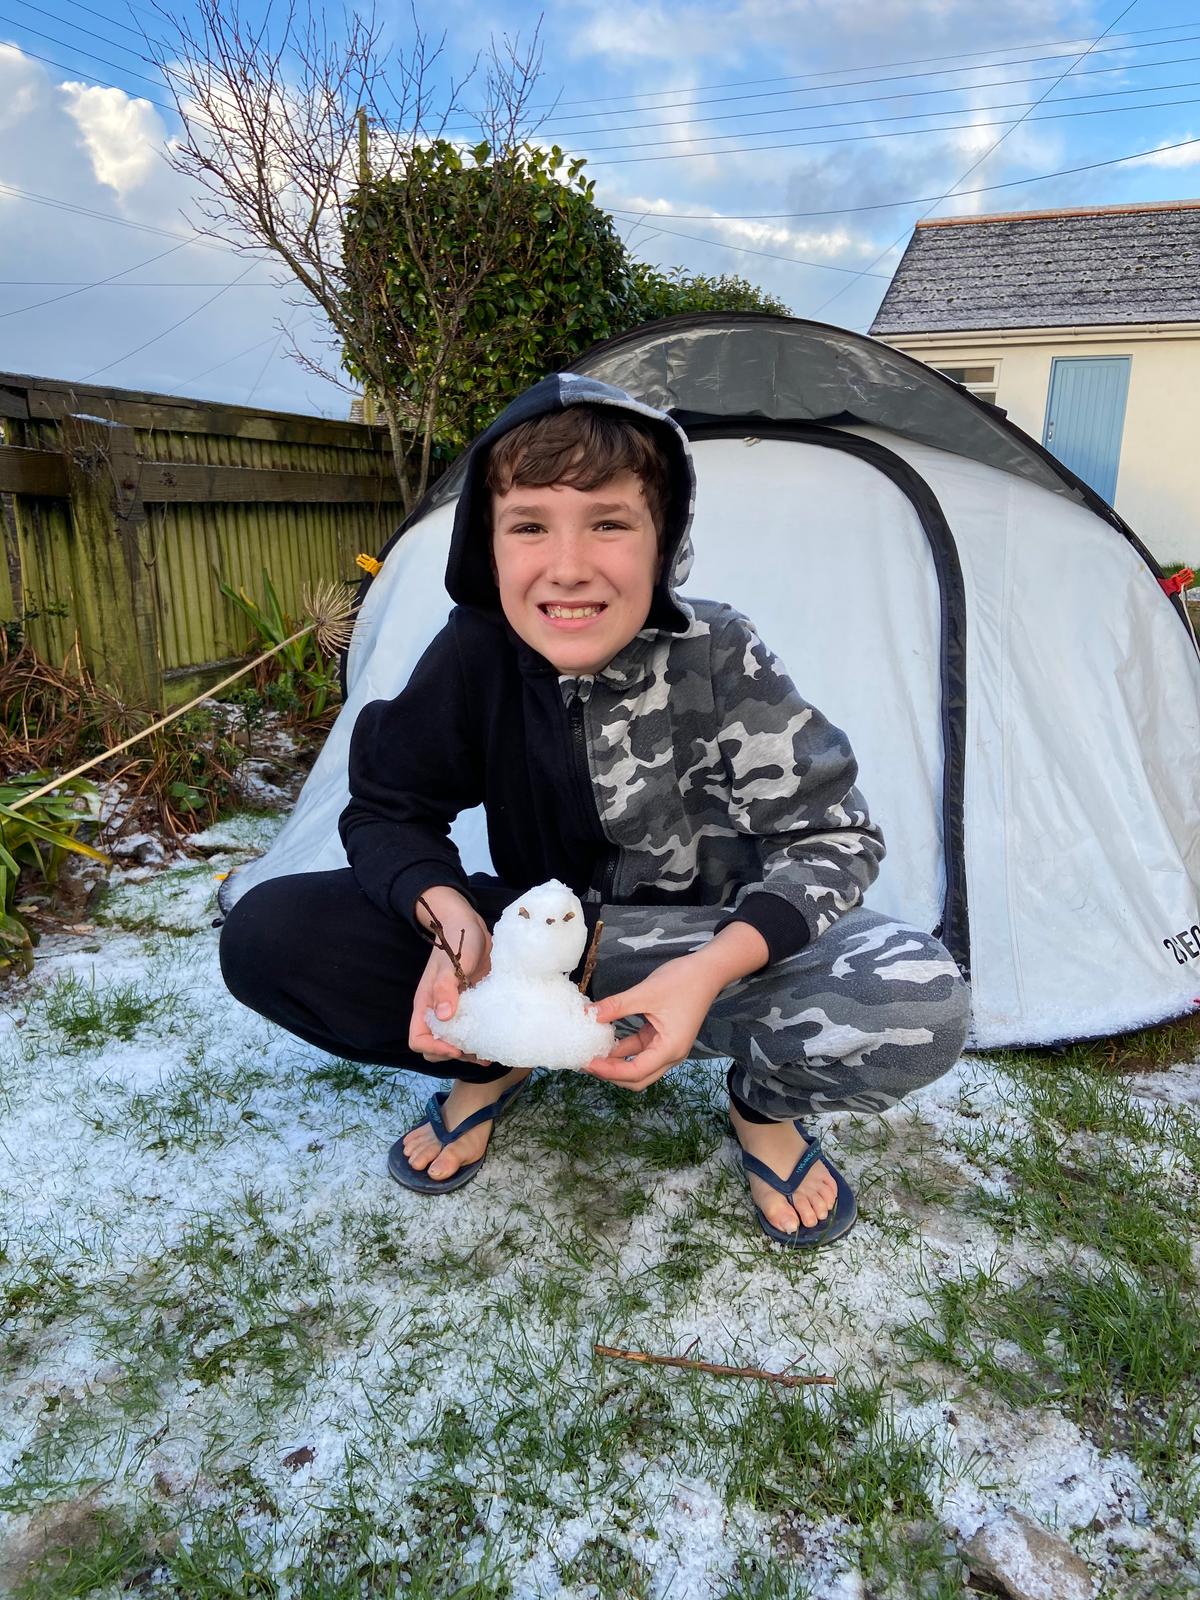 Max Woosey camped outside for three straight years, regardless of weather. (Courtesy of Rachel Woosey)